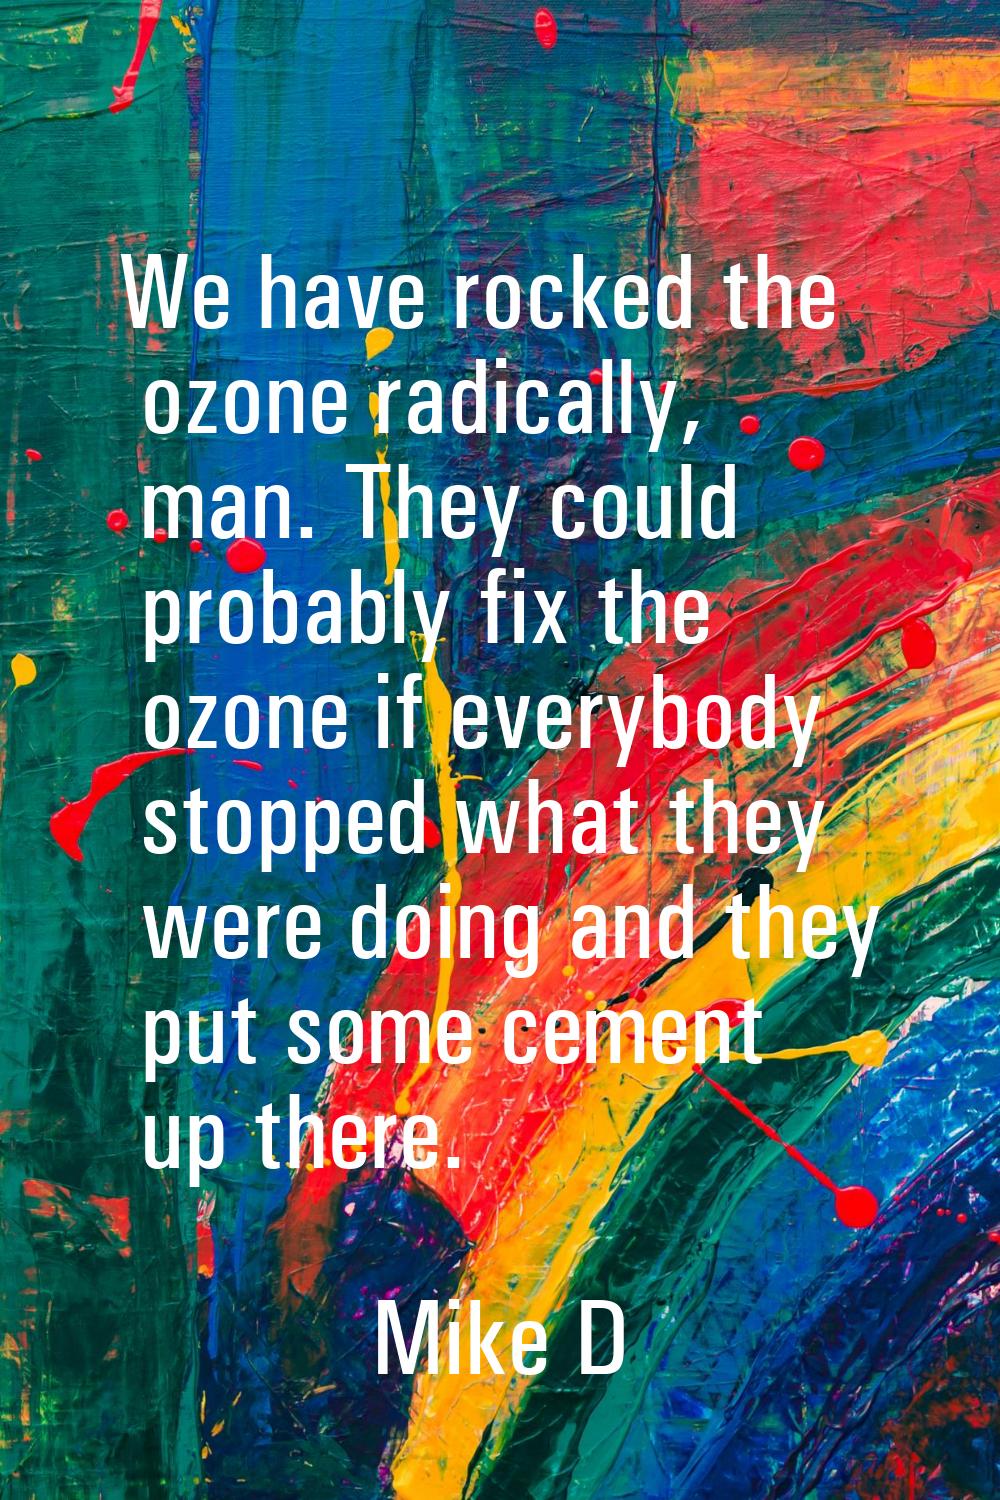 We have rocked the ozone radically, man. They could probably fix the ozone if everybody stopped wha